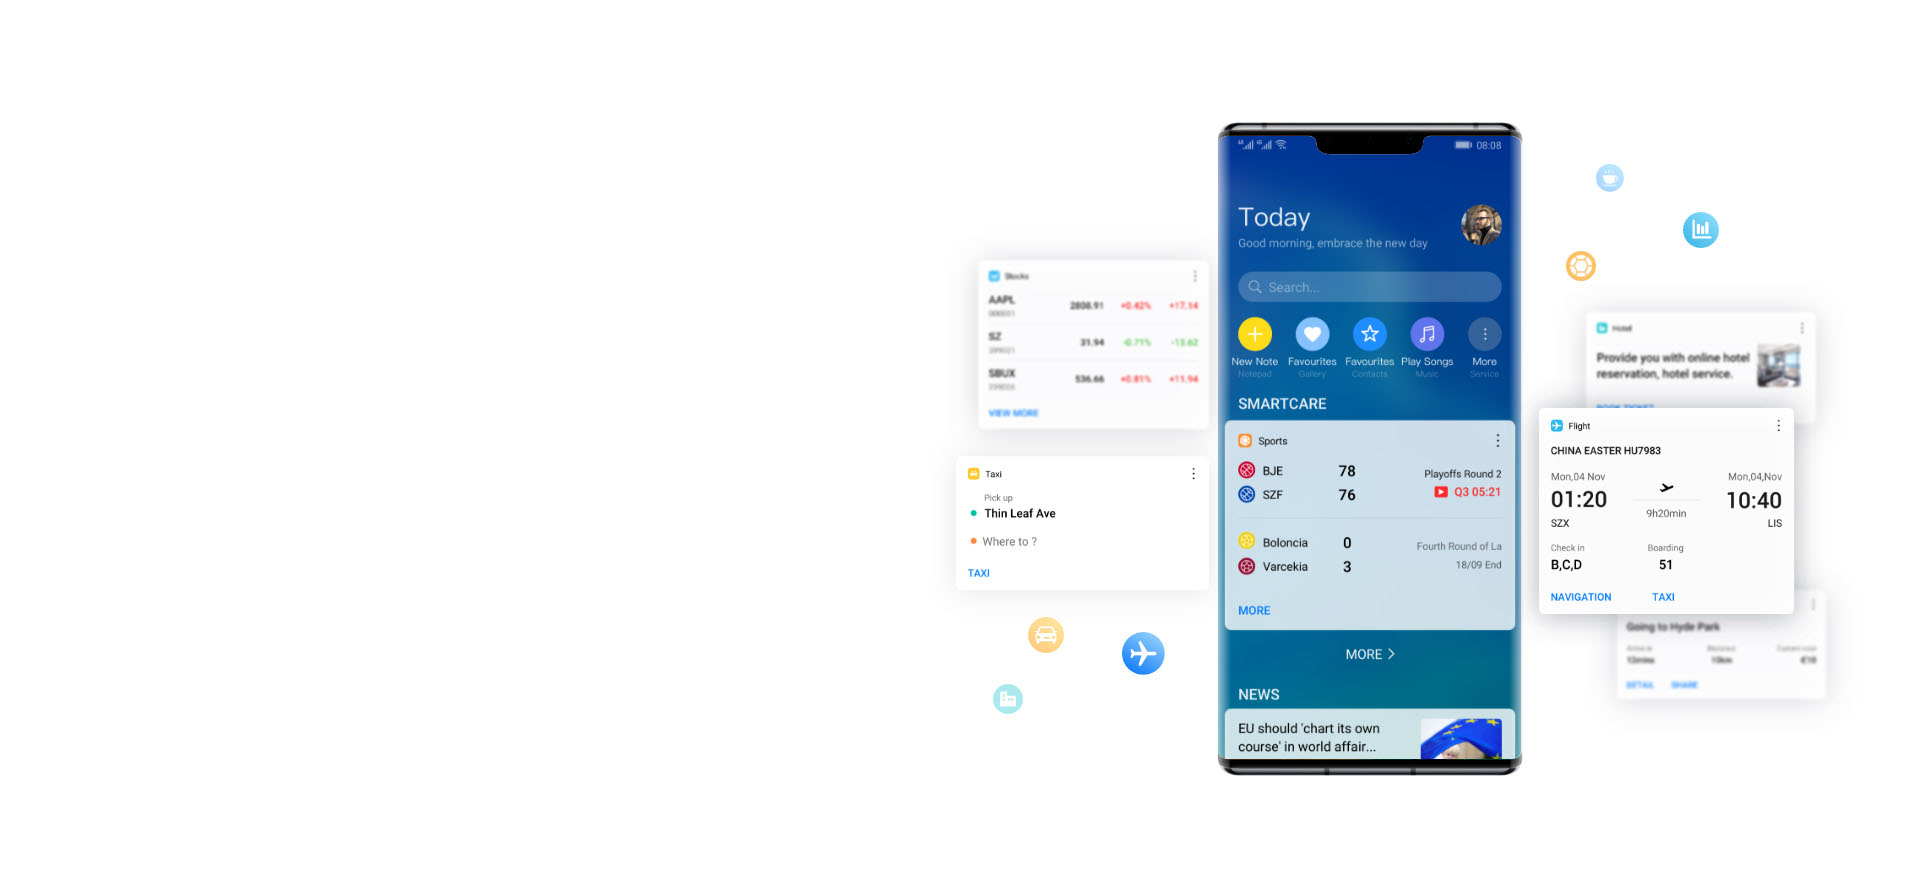 HUAWEI Assistant·TODAY